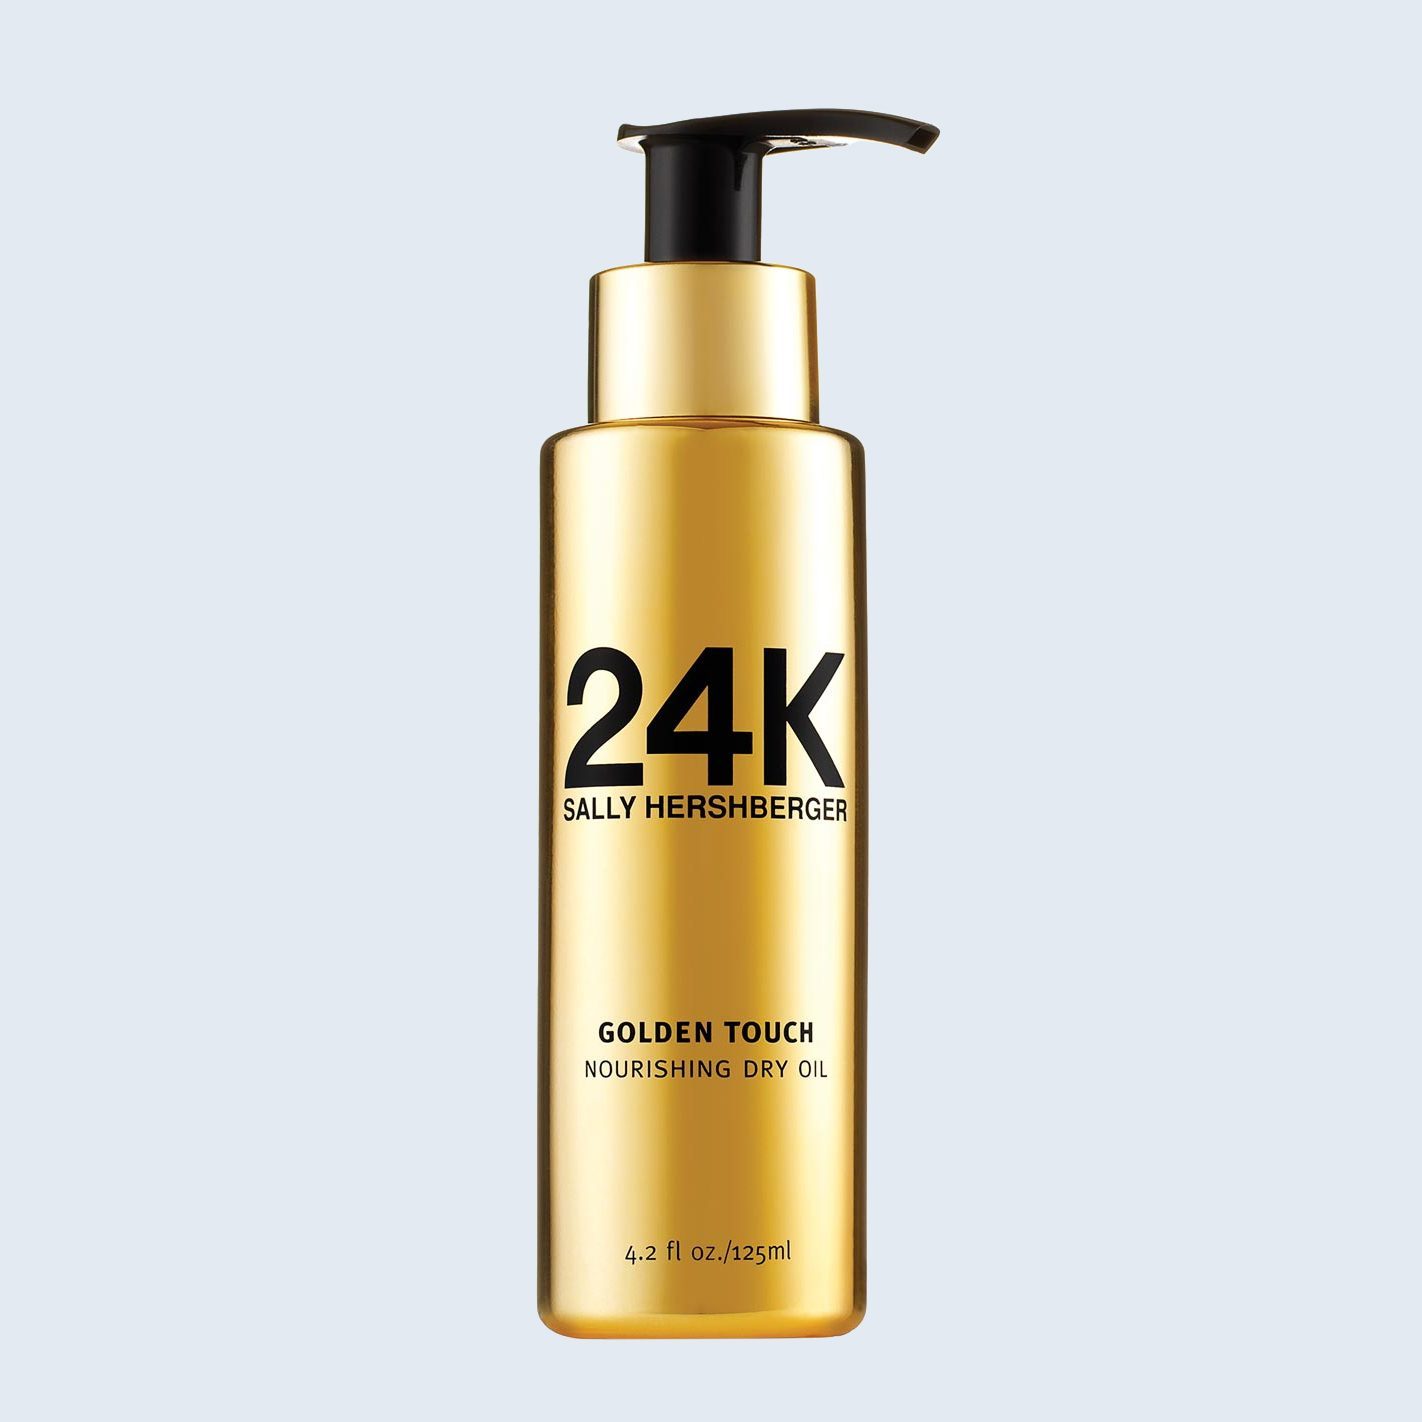 24k Sally Hershberger Dry Hair Oil | products for frizzy hair